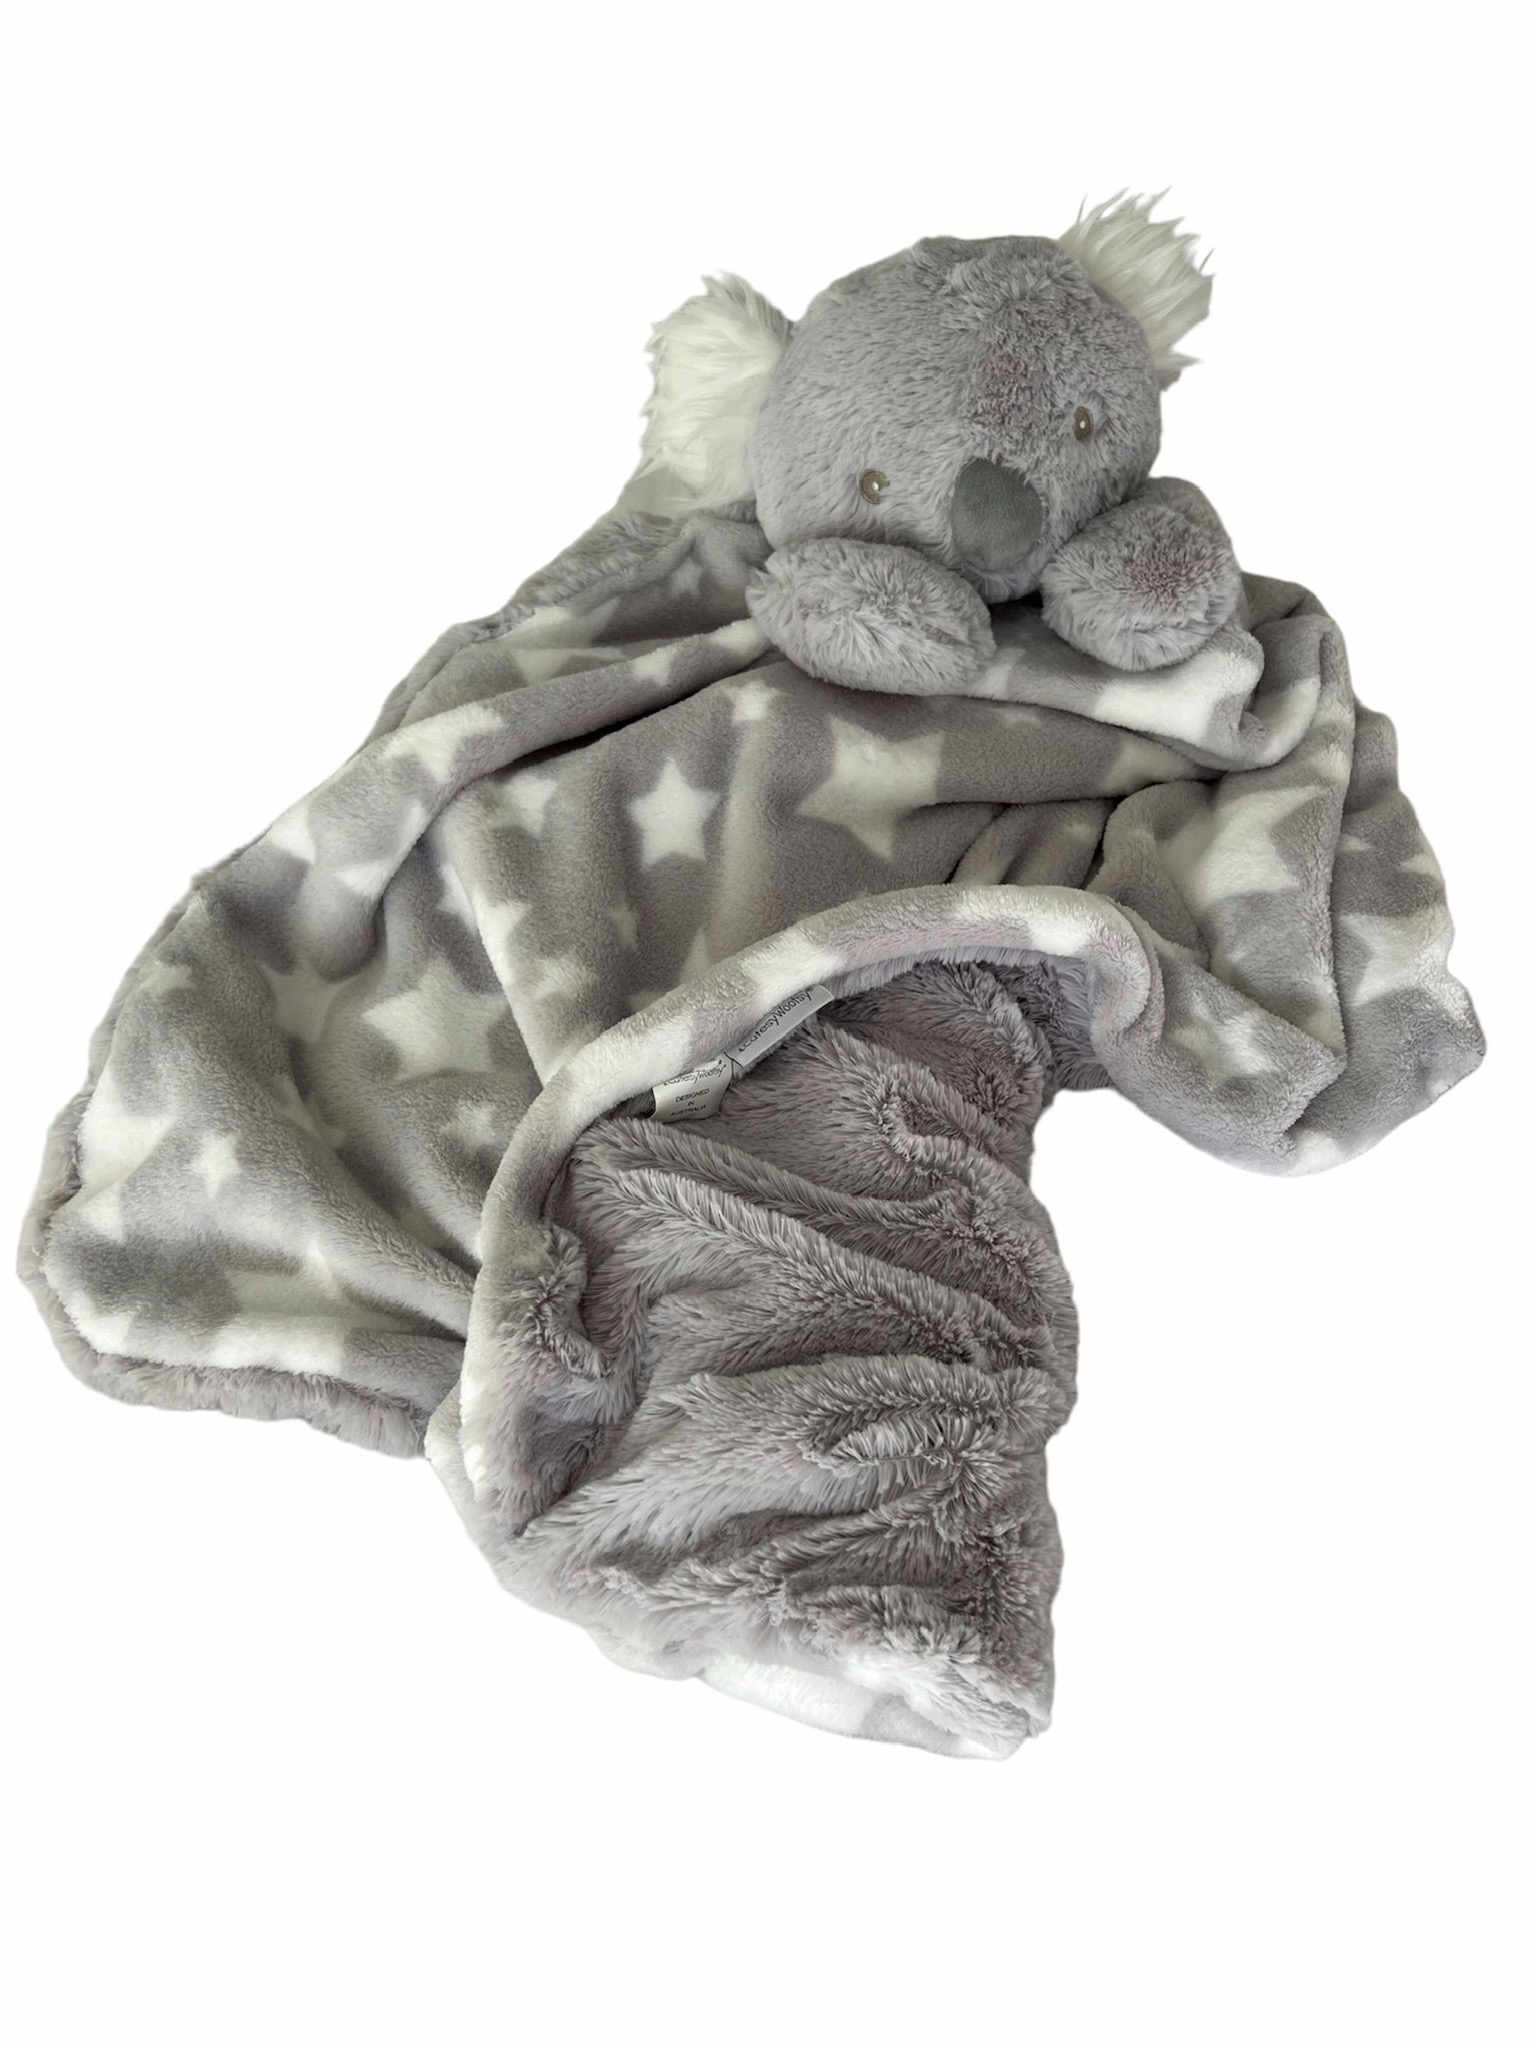 A precious, gentle, stormy-cloud grey Koala plush toy head with fluffy white fur inside its ears and 2 gentle paws resting on a luxuriously large, 2 layer stormy grey-cloud blanket with fresh white stars and an underlay of that same calming stormy-cloud colour of cozy long plush, laying settled and patient offering countless cuddles